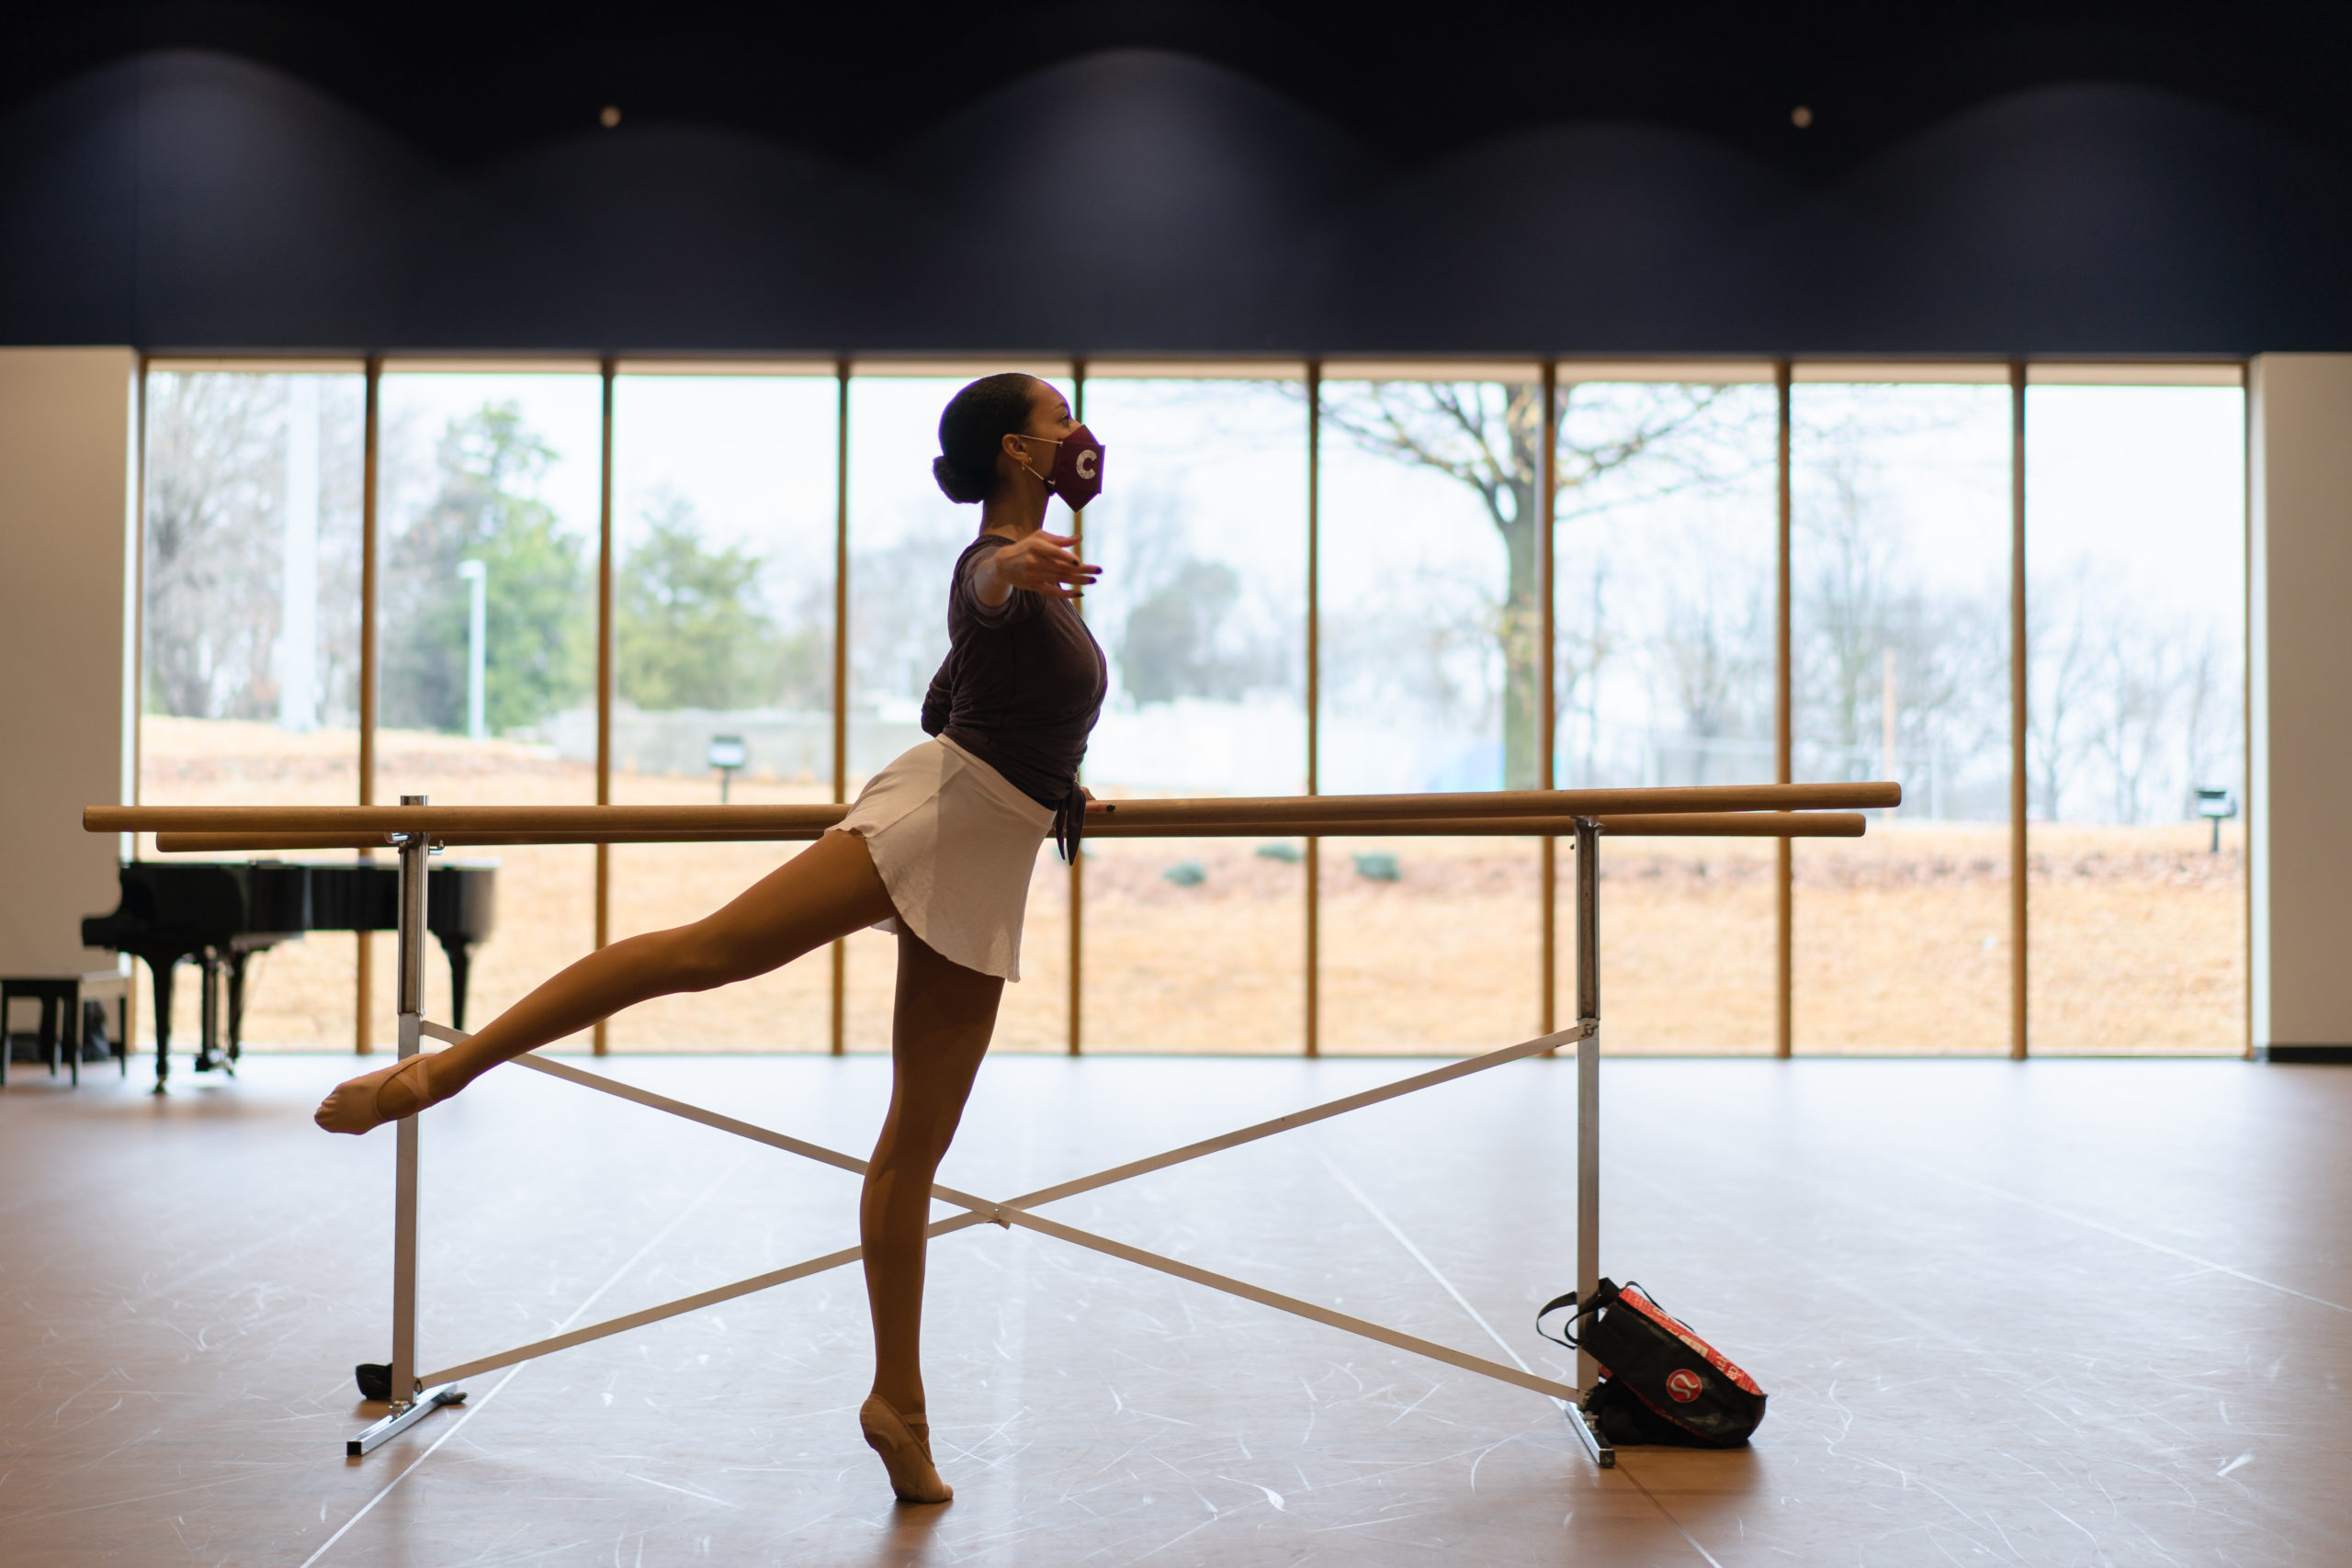 A dancer stands in releve arabesque at the barre, wearing a mask. She is in a large studio with a wall of windows behind her, overlooking some trees.